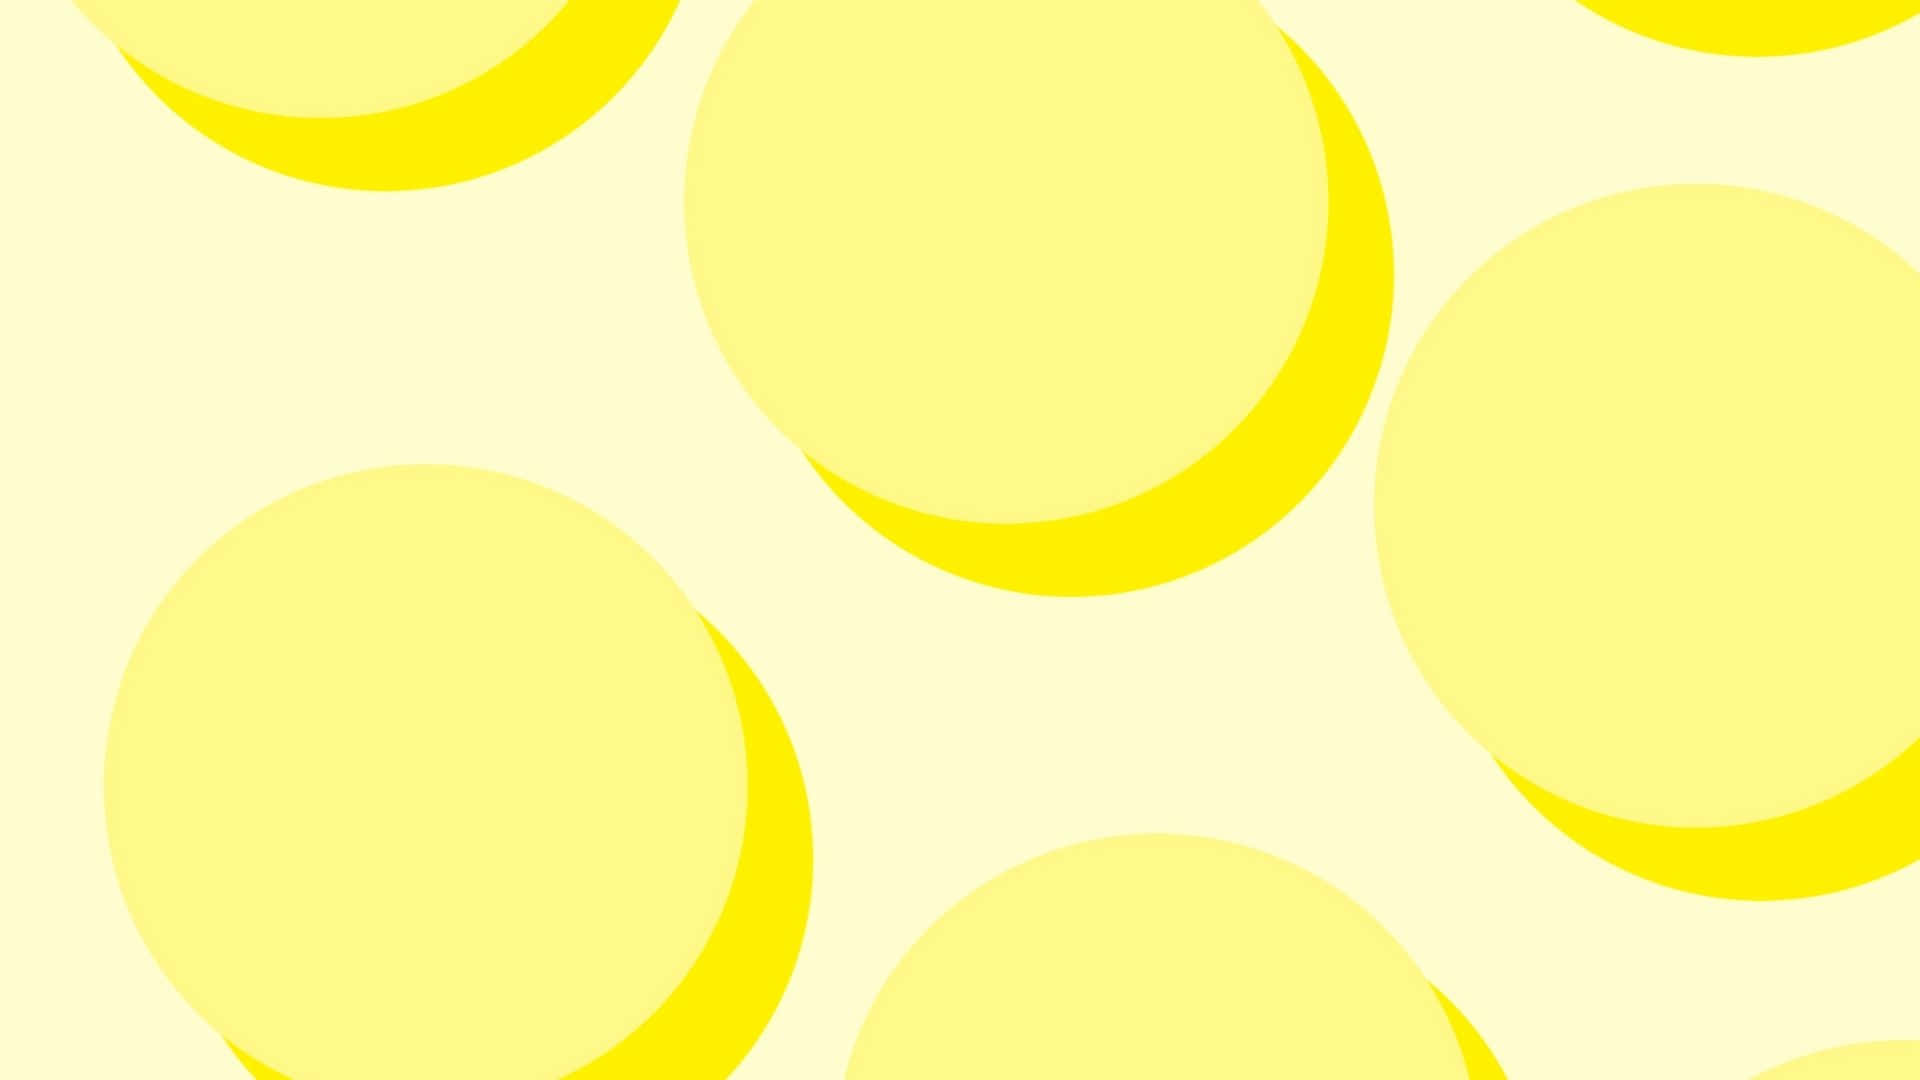 A sun-tinted yellow backdrop radiates warmth, energy, and fresh optimism.